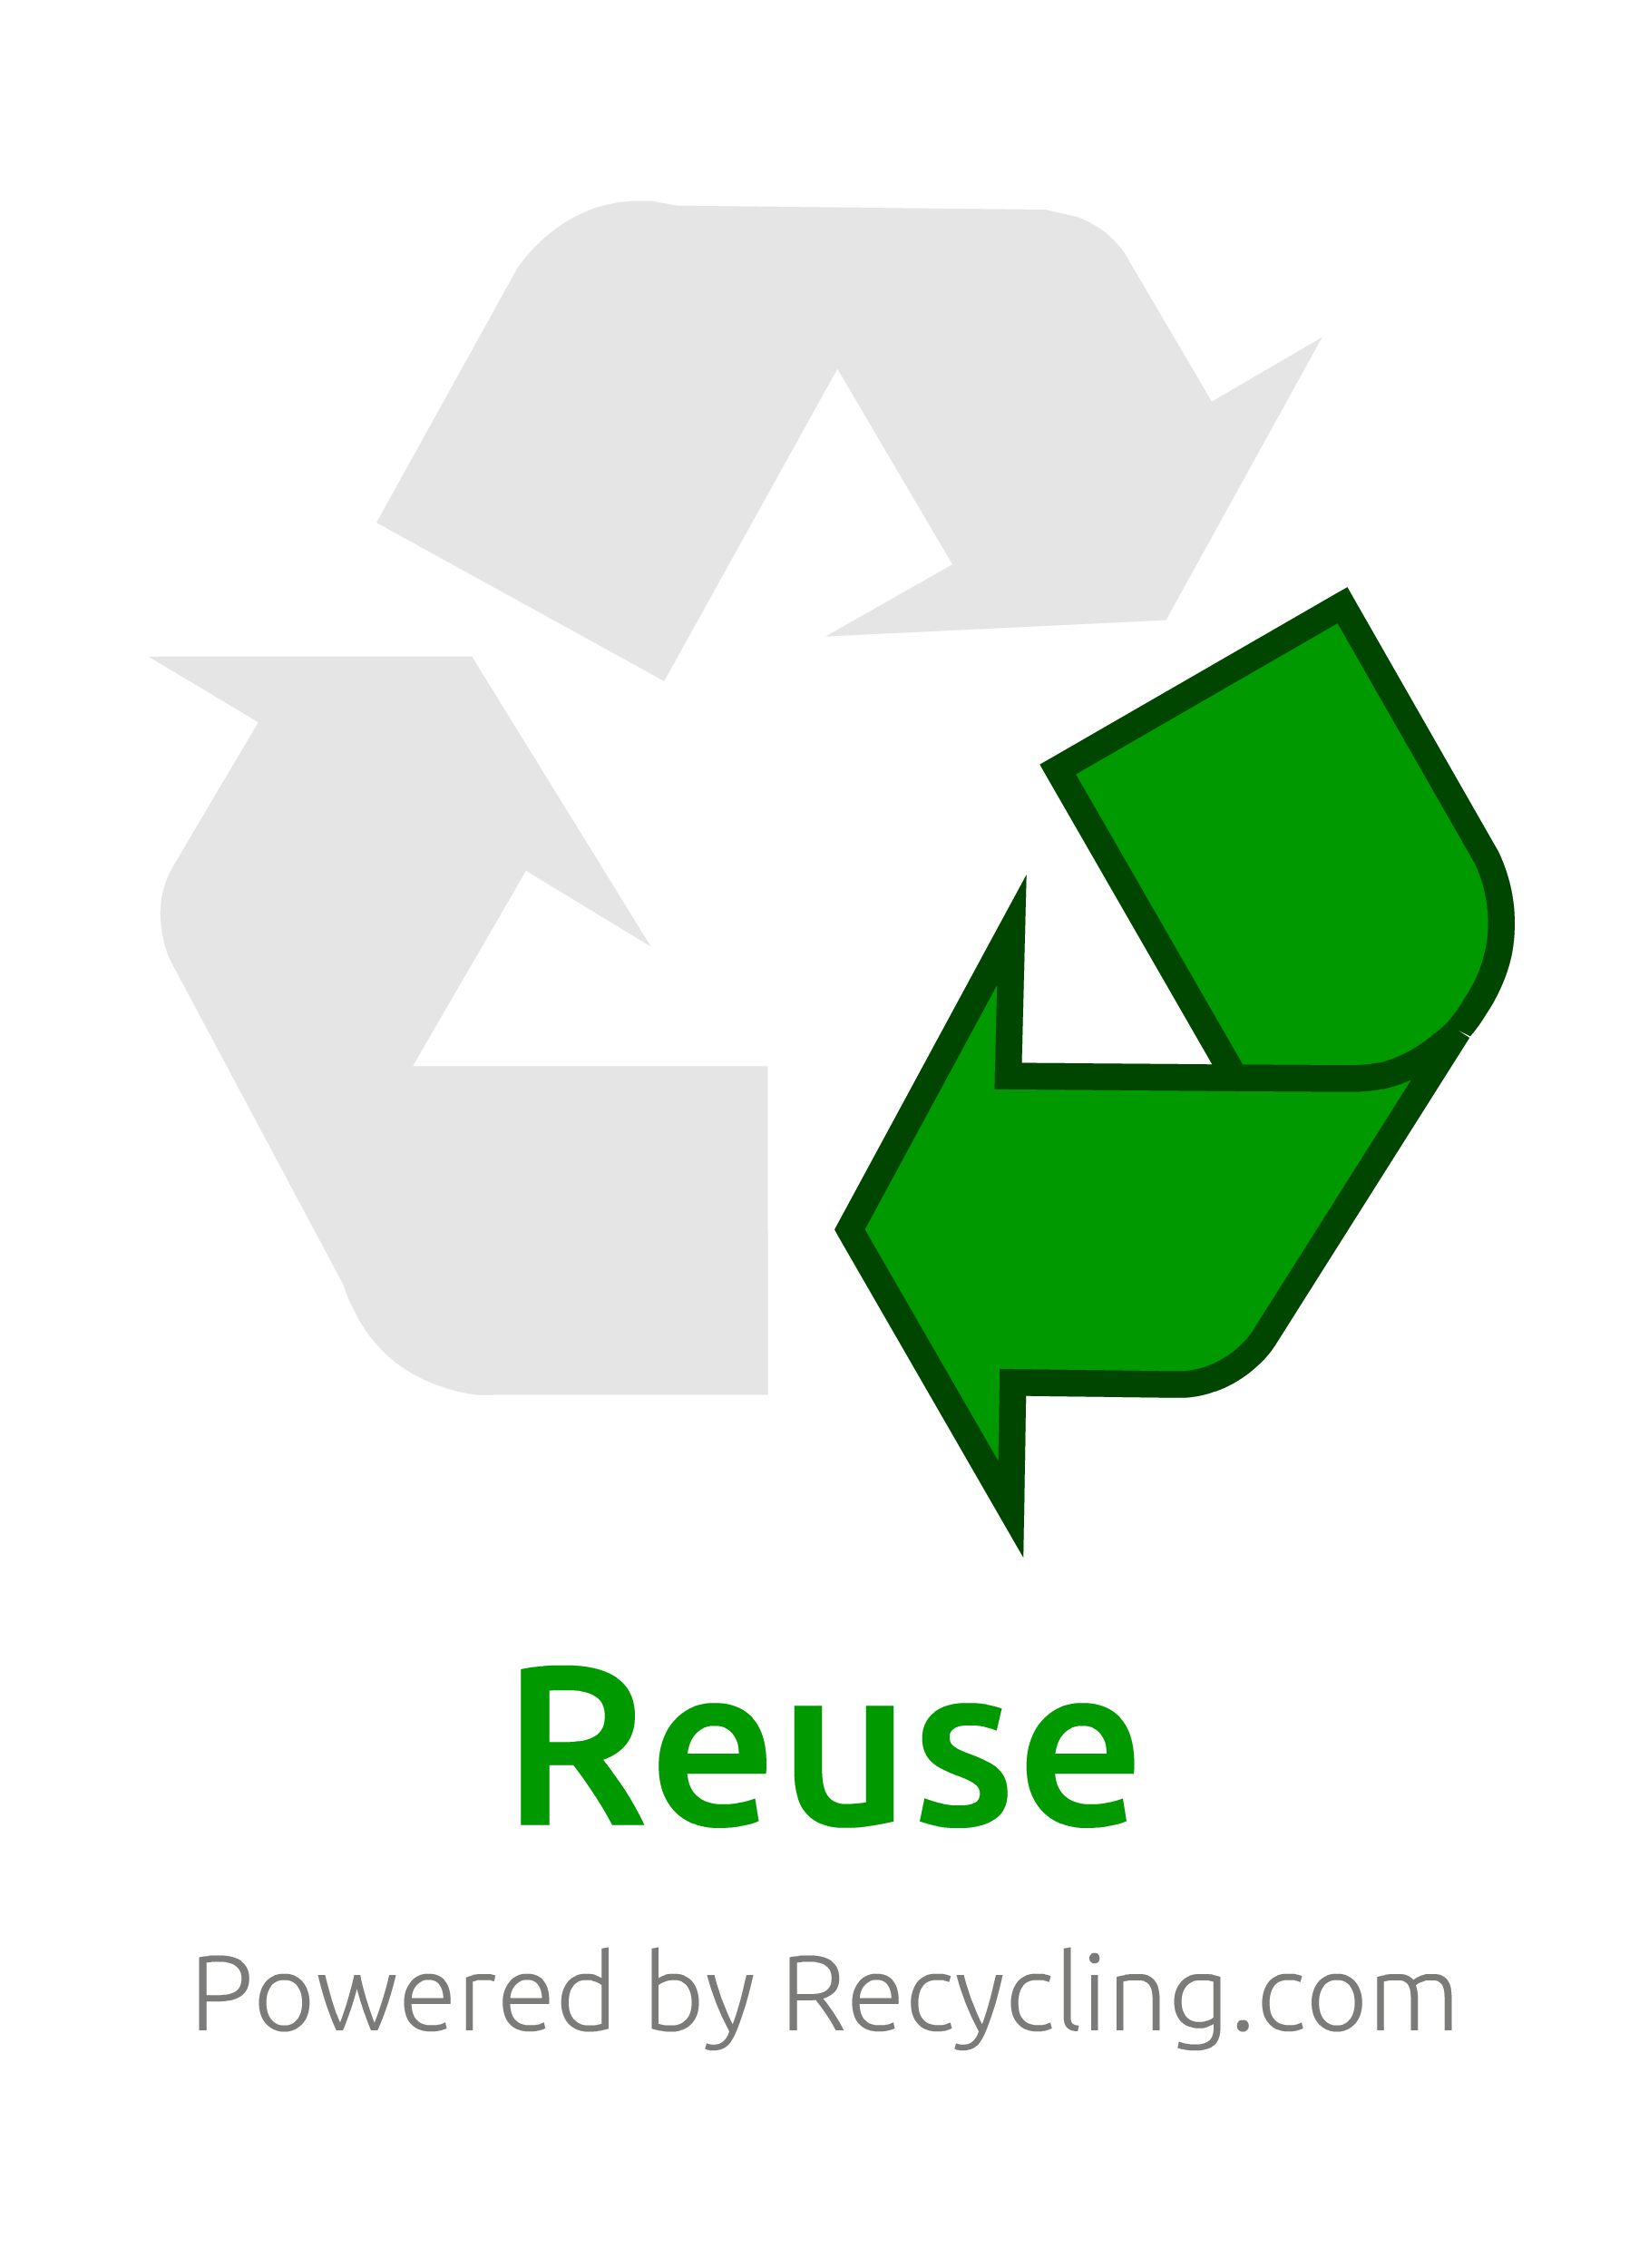 Reuse Logo - The Recycling Trilogy, Reuse, Recycle